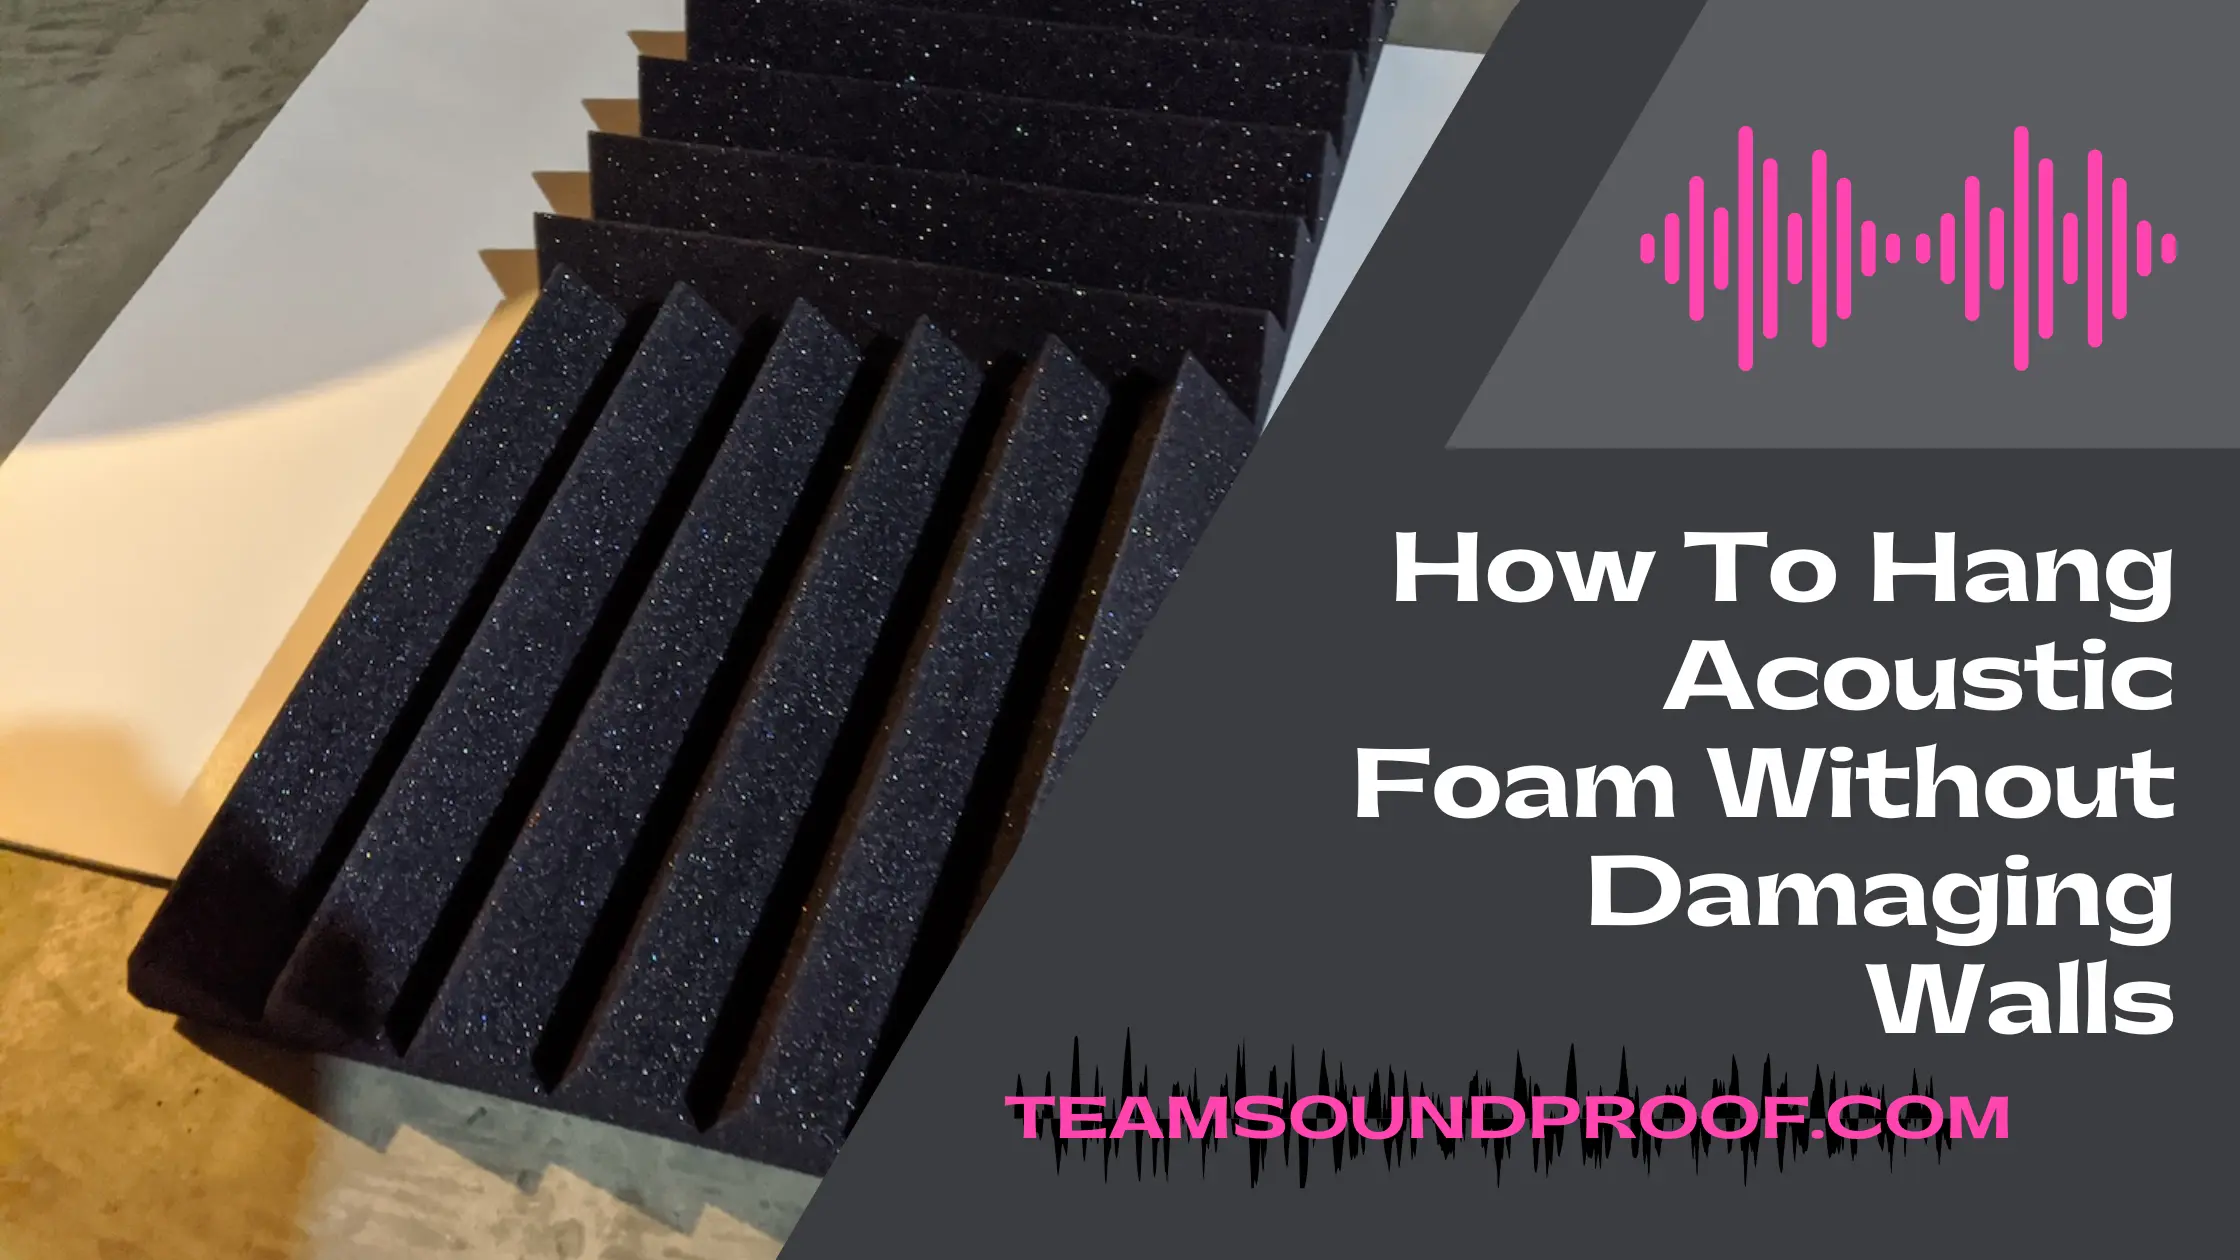 How to Hang Acoustic Foam Without Damaging Walls? #1 Guide